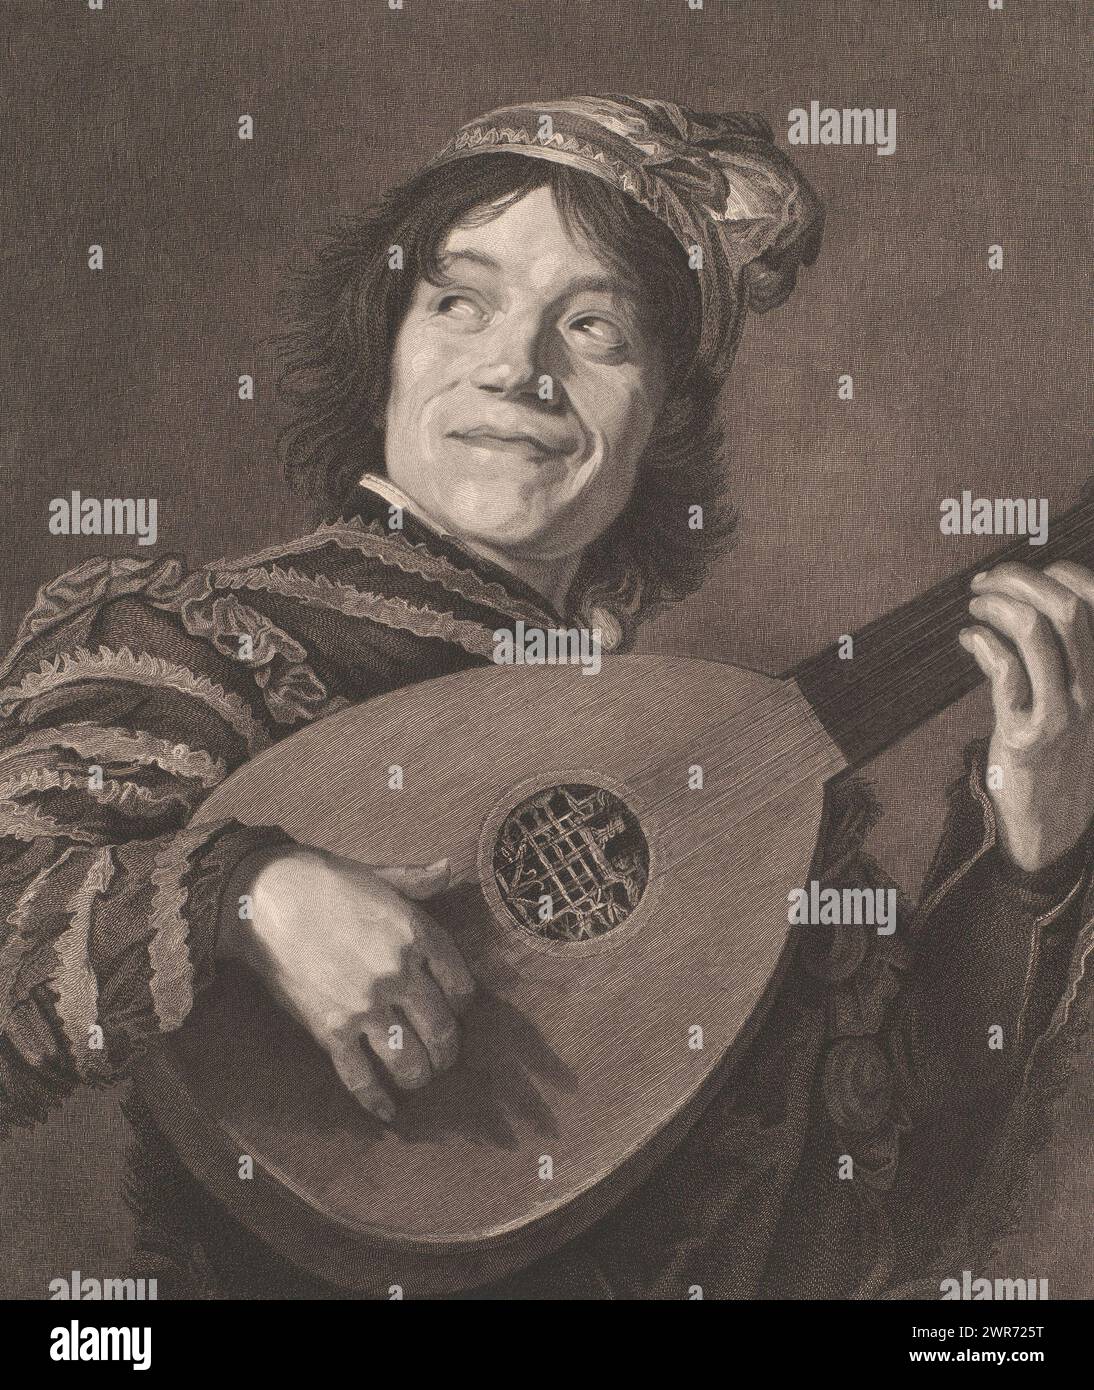 Lute player, print maker: Rudolf Stang, after painting by: Frans Hals, 1841 - 1891, paper, etching, height 475 mm × width 393 mm, print Stock Photo